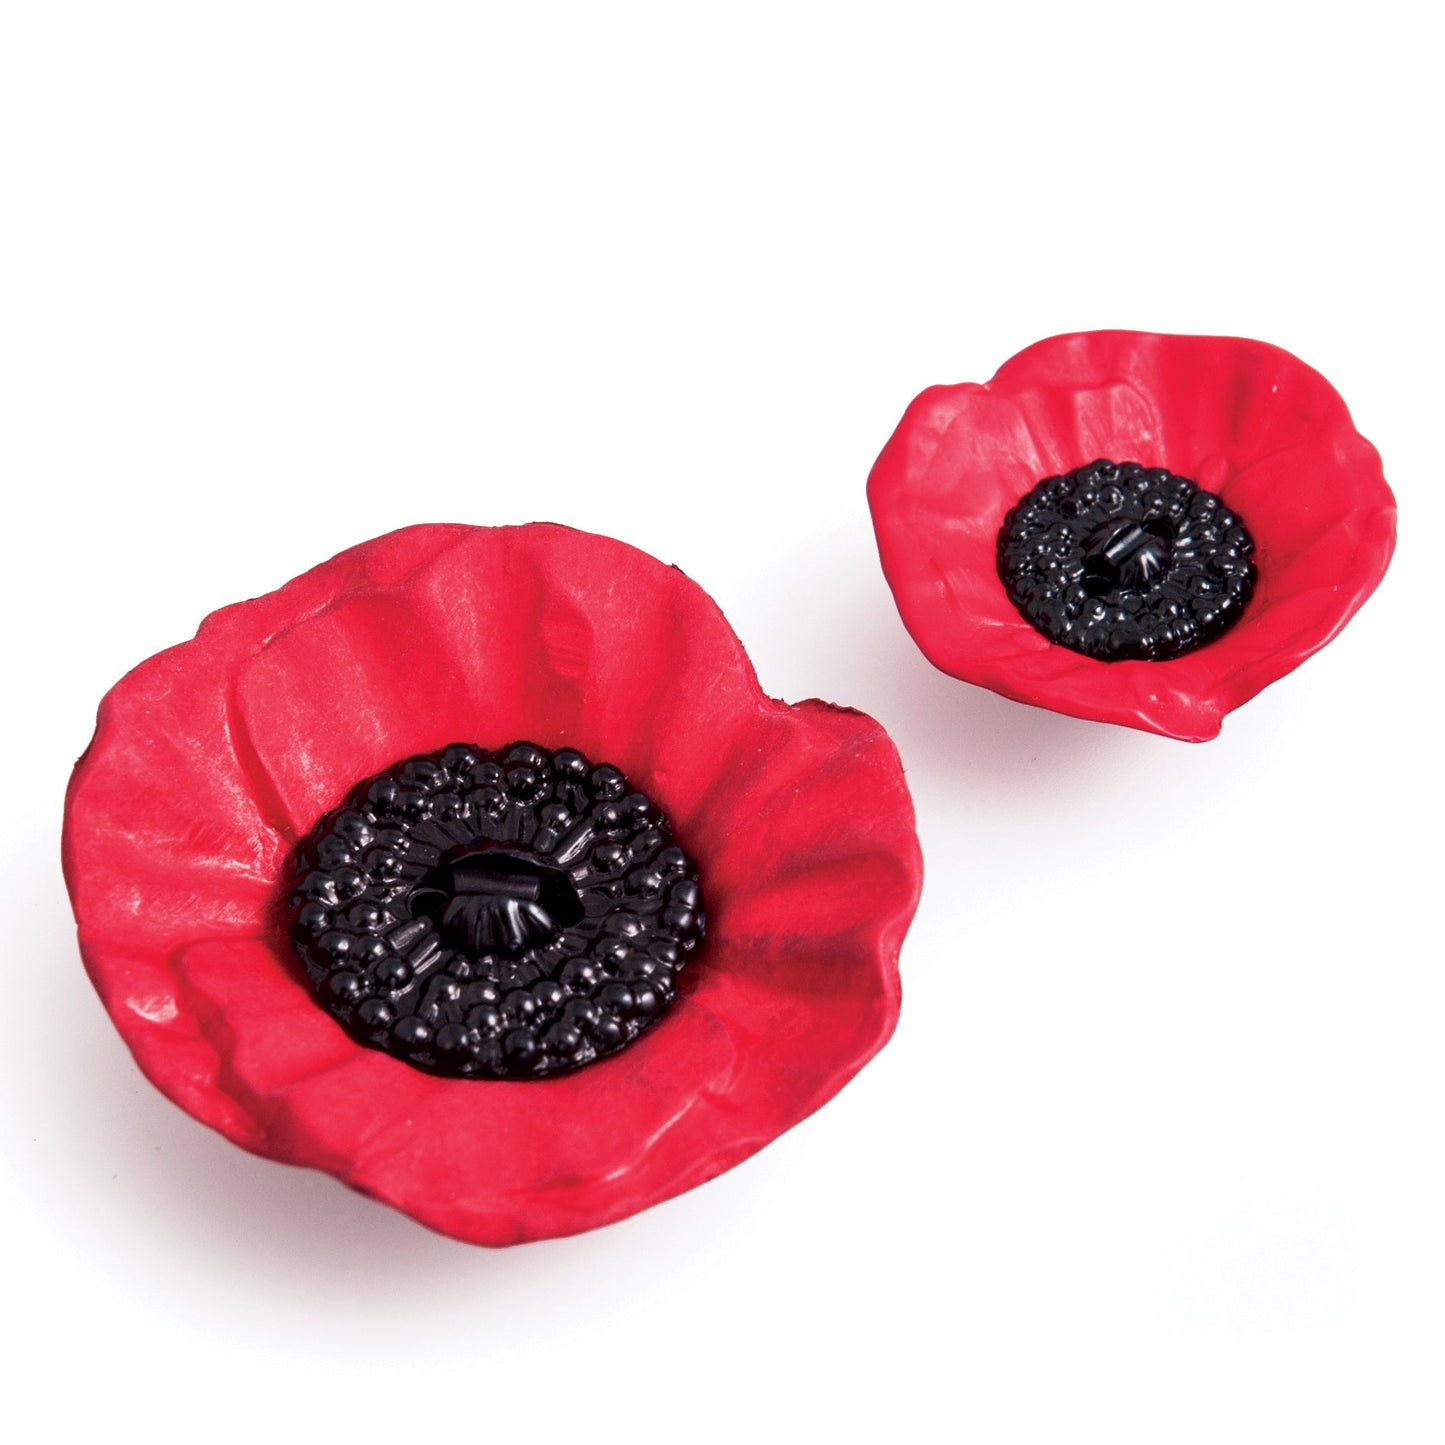 2 Hole Remembrance Day Poppy Button - 20mm [LC8.2]